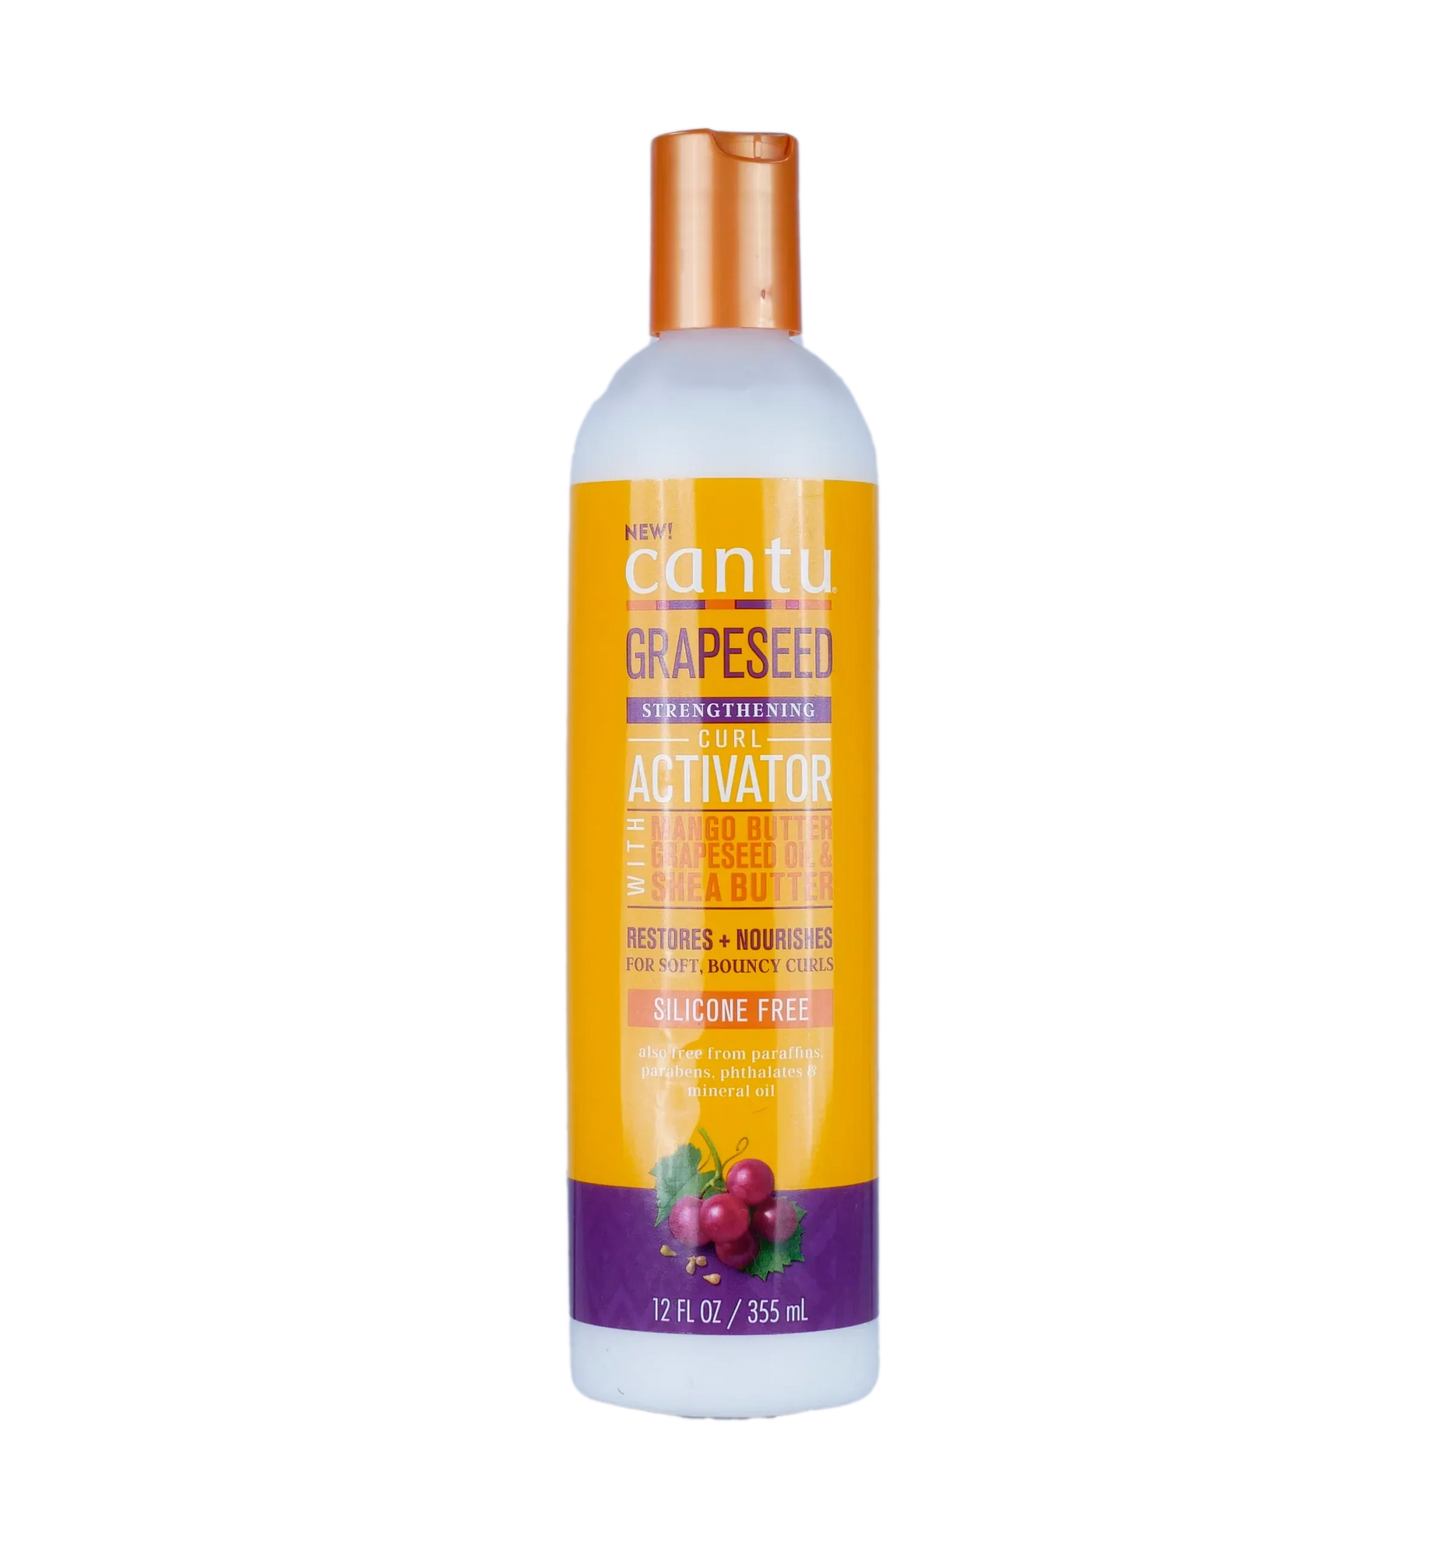 Cantu Grapeseed Strenghtening Curl Activator